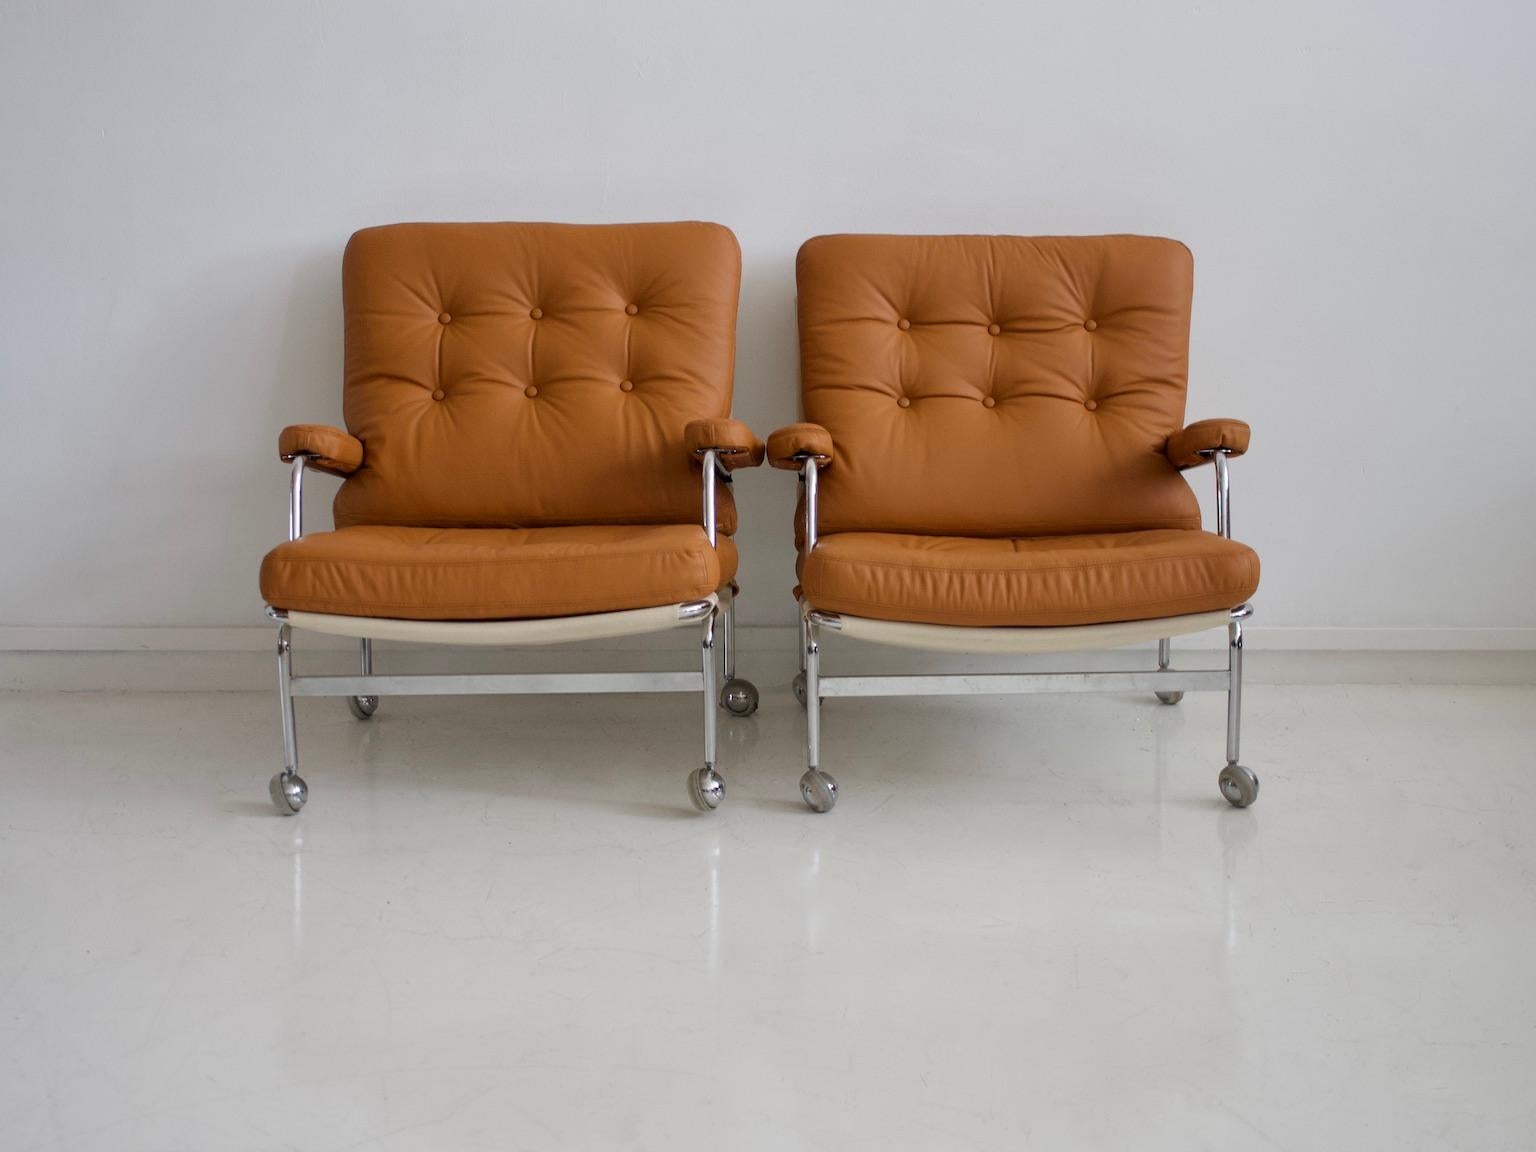 Pair of armchairs, model 'Karin', designed by Bruno Mathsson 1969 and produced by Dux. Frame in chrome-plated metal, legs fitted with castors. Cushions and armrests newly upholstered with brown leather, reusing the original fabric by the maker